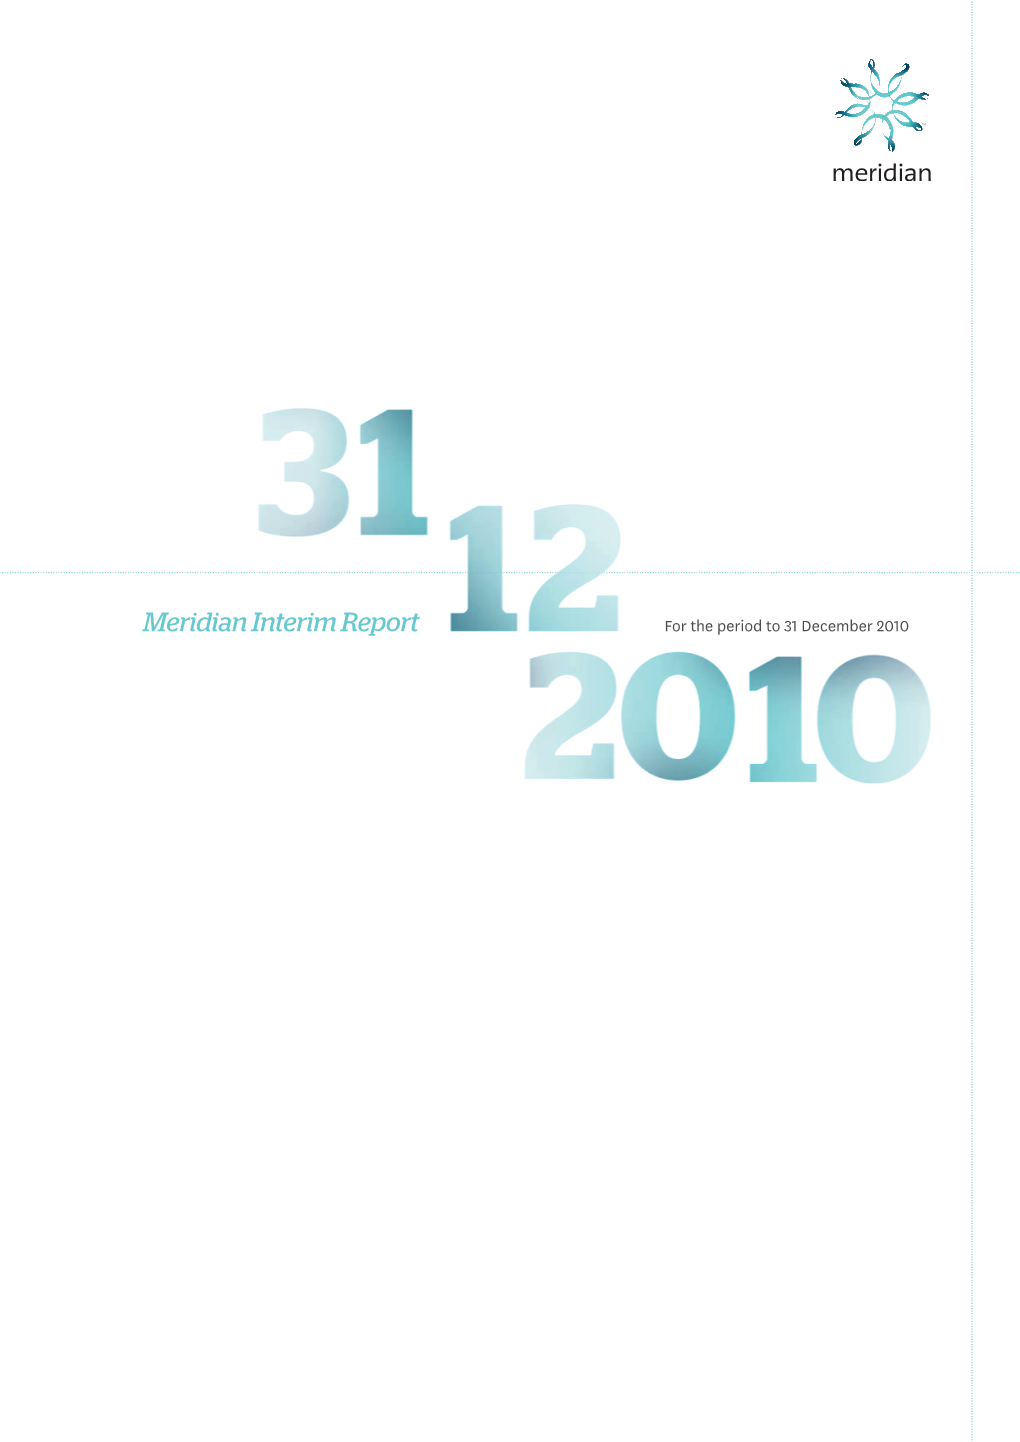 Meridian Energy Limited Group – Condensed Interim Financial Statements Income Statement for the Six Months Ended 31 December 2010